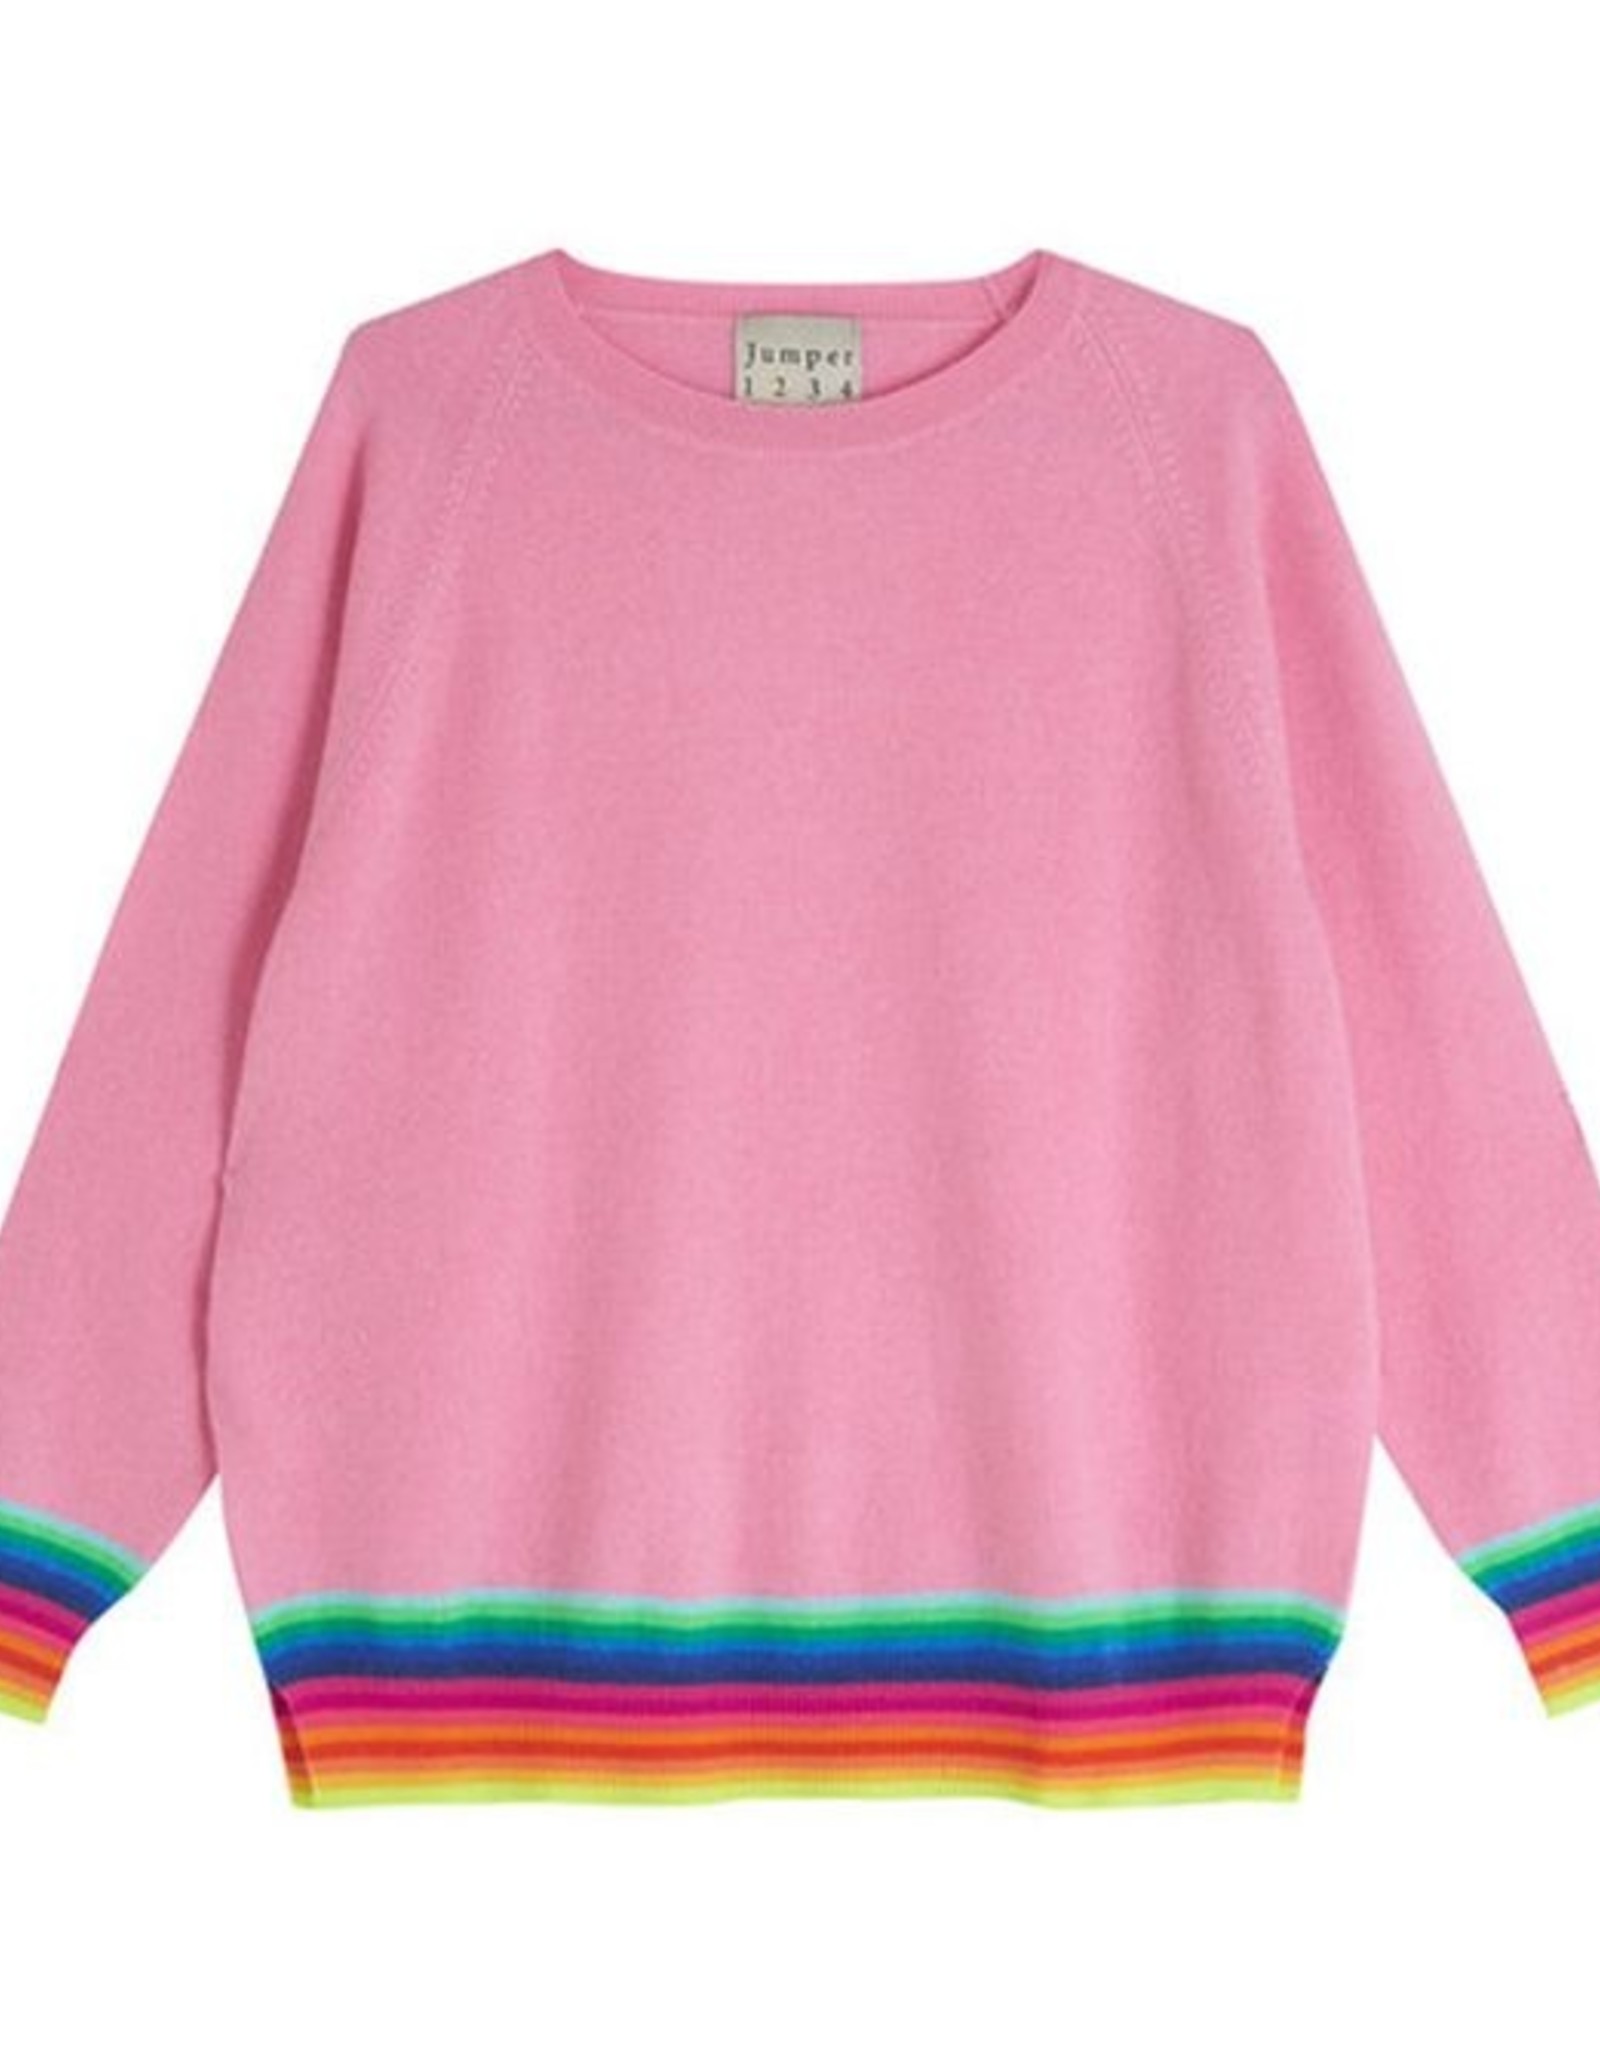 JUMPER 1234 MEXICAN WAVE SWEAT PINK